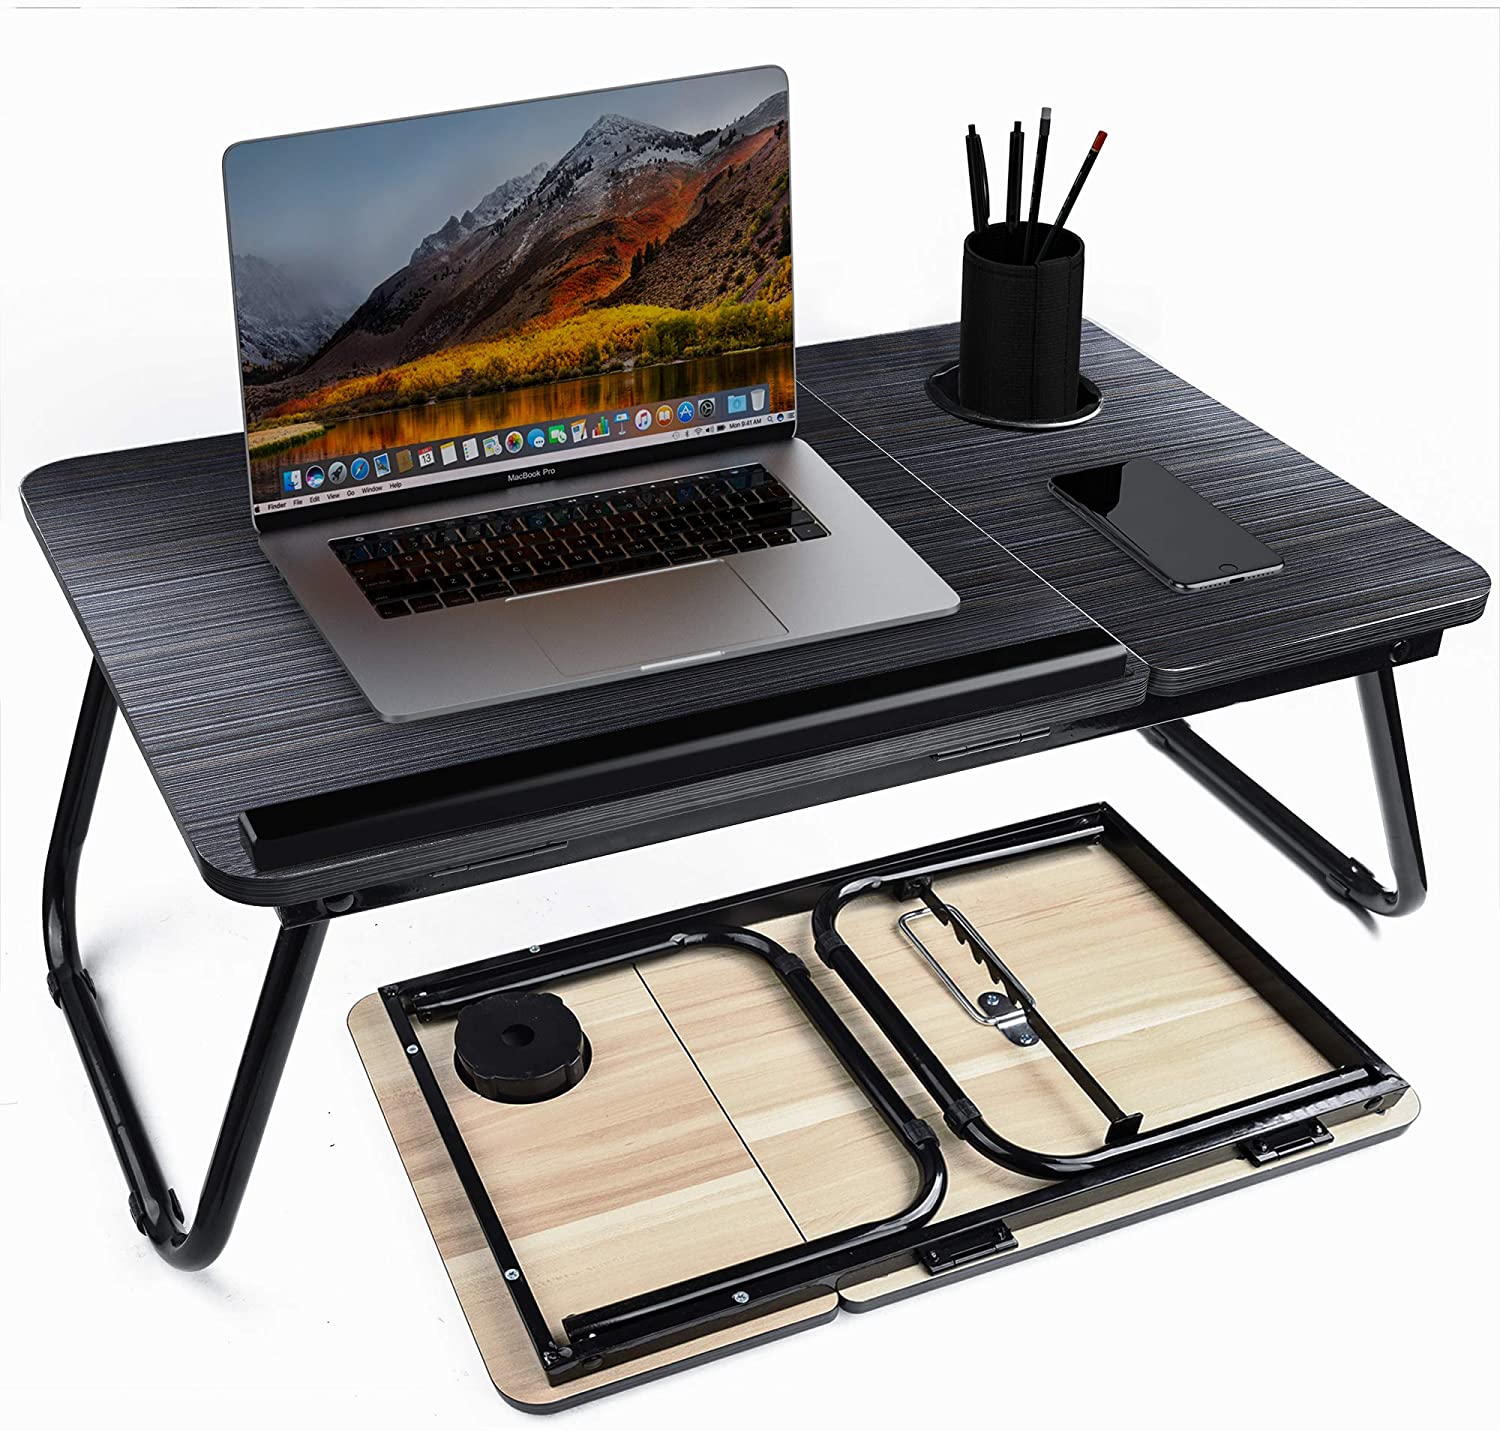 Laptop Desk, Bed Tray Table with Cup Holder, Portable Home Working Lap Desk, Angle Adjustable Laptop Stand, Multi Tasking Folding Computer Desk for Sofa Couch Floor, Writing Eating Reading Surfing